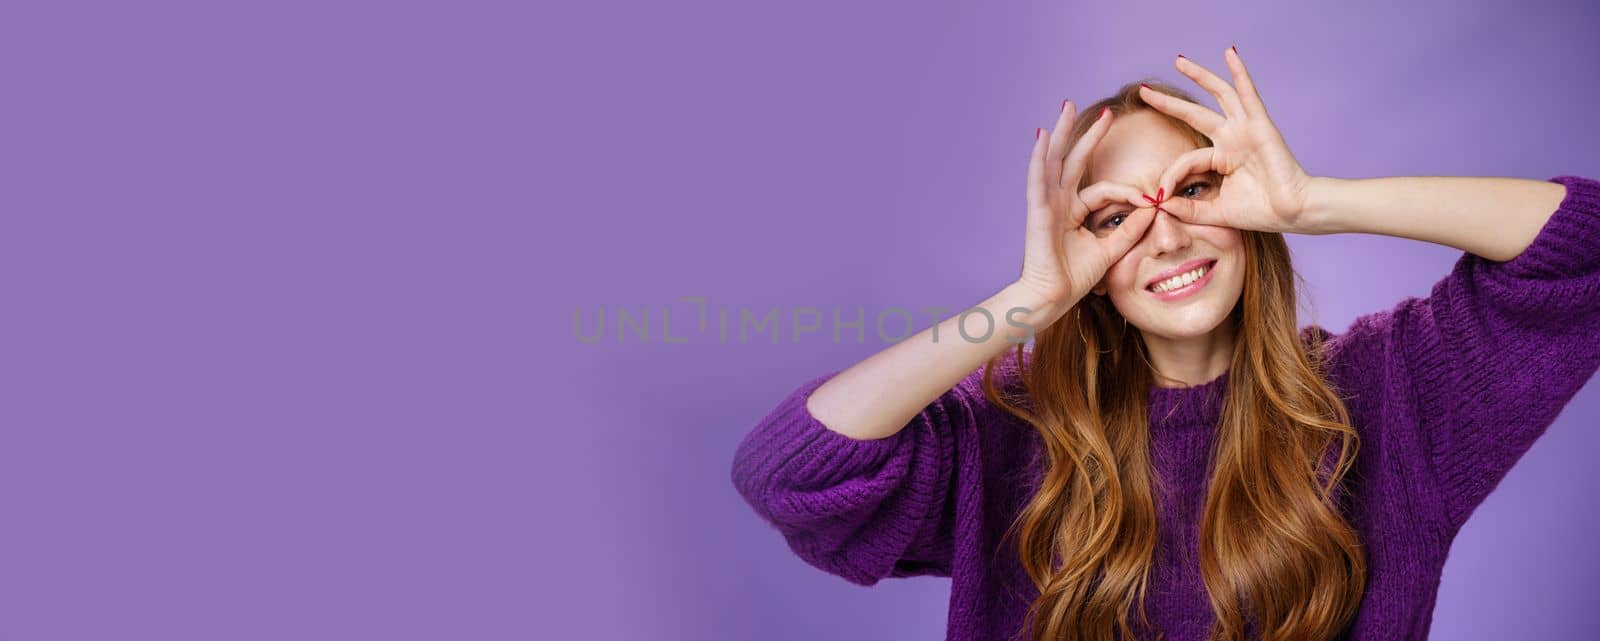 Hey smile more. Portrait of bright and funny charming redhead girl in purple sweater making mask with hands over eyes and smiling broadly acting like superhero posing excited and playful.